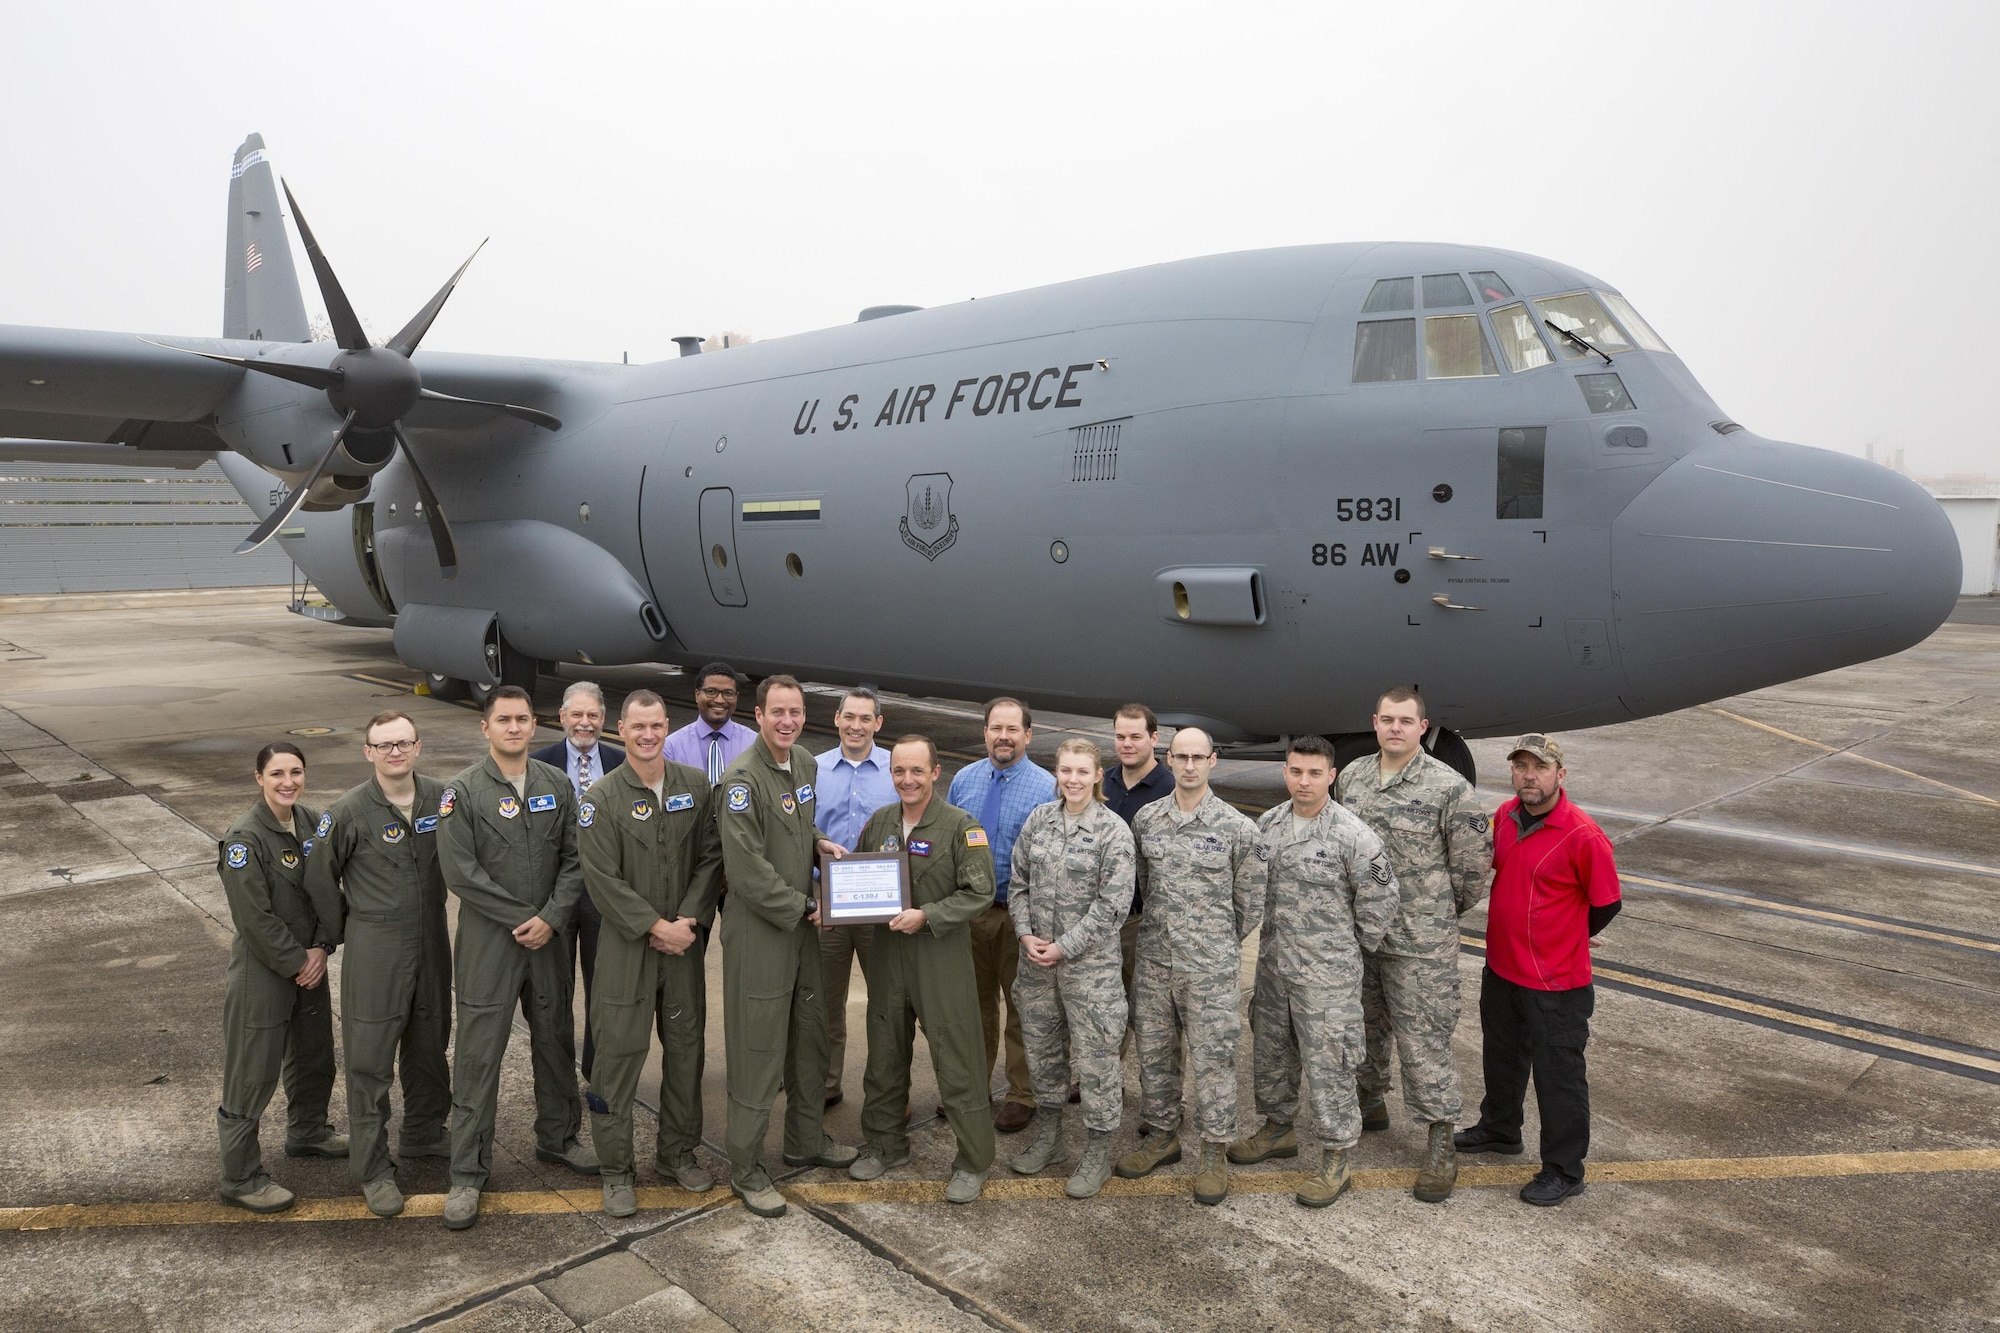 Lockheed Martin Aeronautics Company turns over the keys to the newest C130J in the 37th Airlift Squadron fleet to the team from Ramstein. Part of a concept, according to Air Mobility Command, called “Enterprise Fleet Management”, the new aircraft replaces a C-130J that was transferred to Yokota Air Base. (Courtesy photo, Lockheed Martin Aeronautics Company)